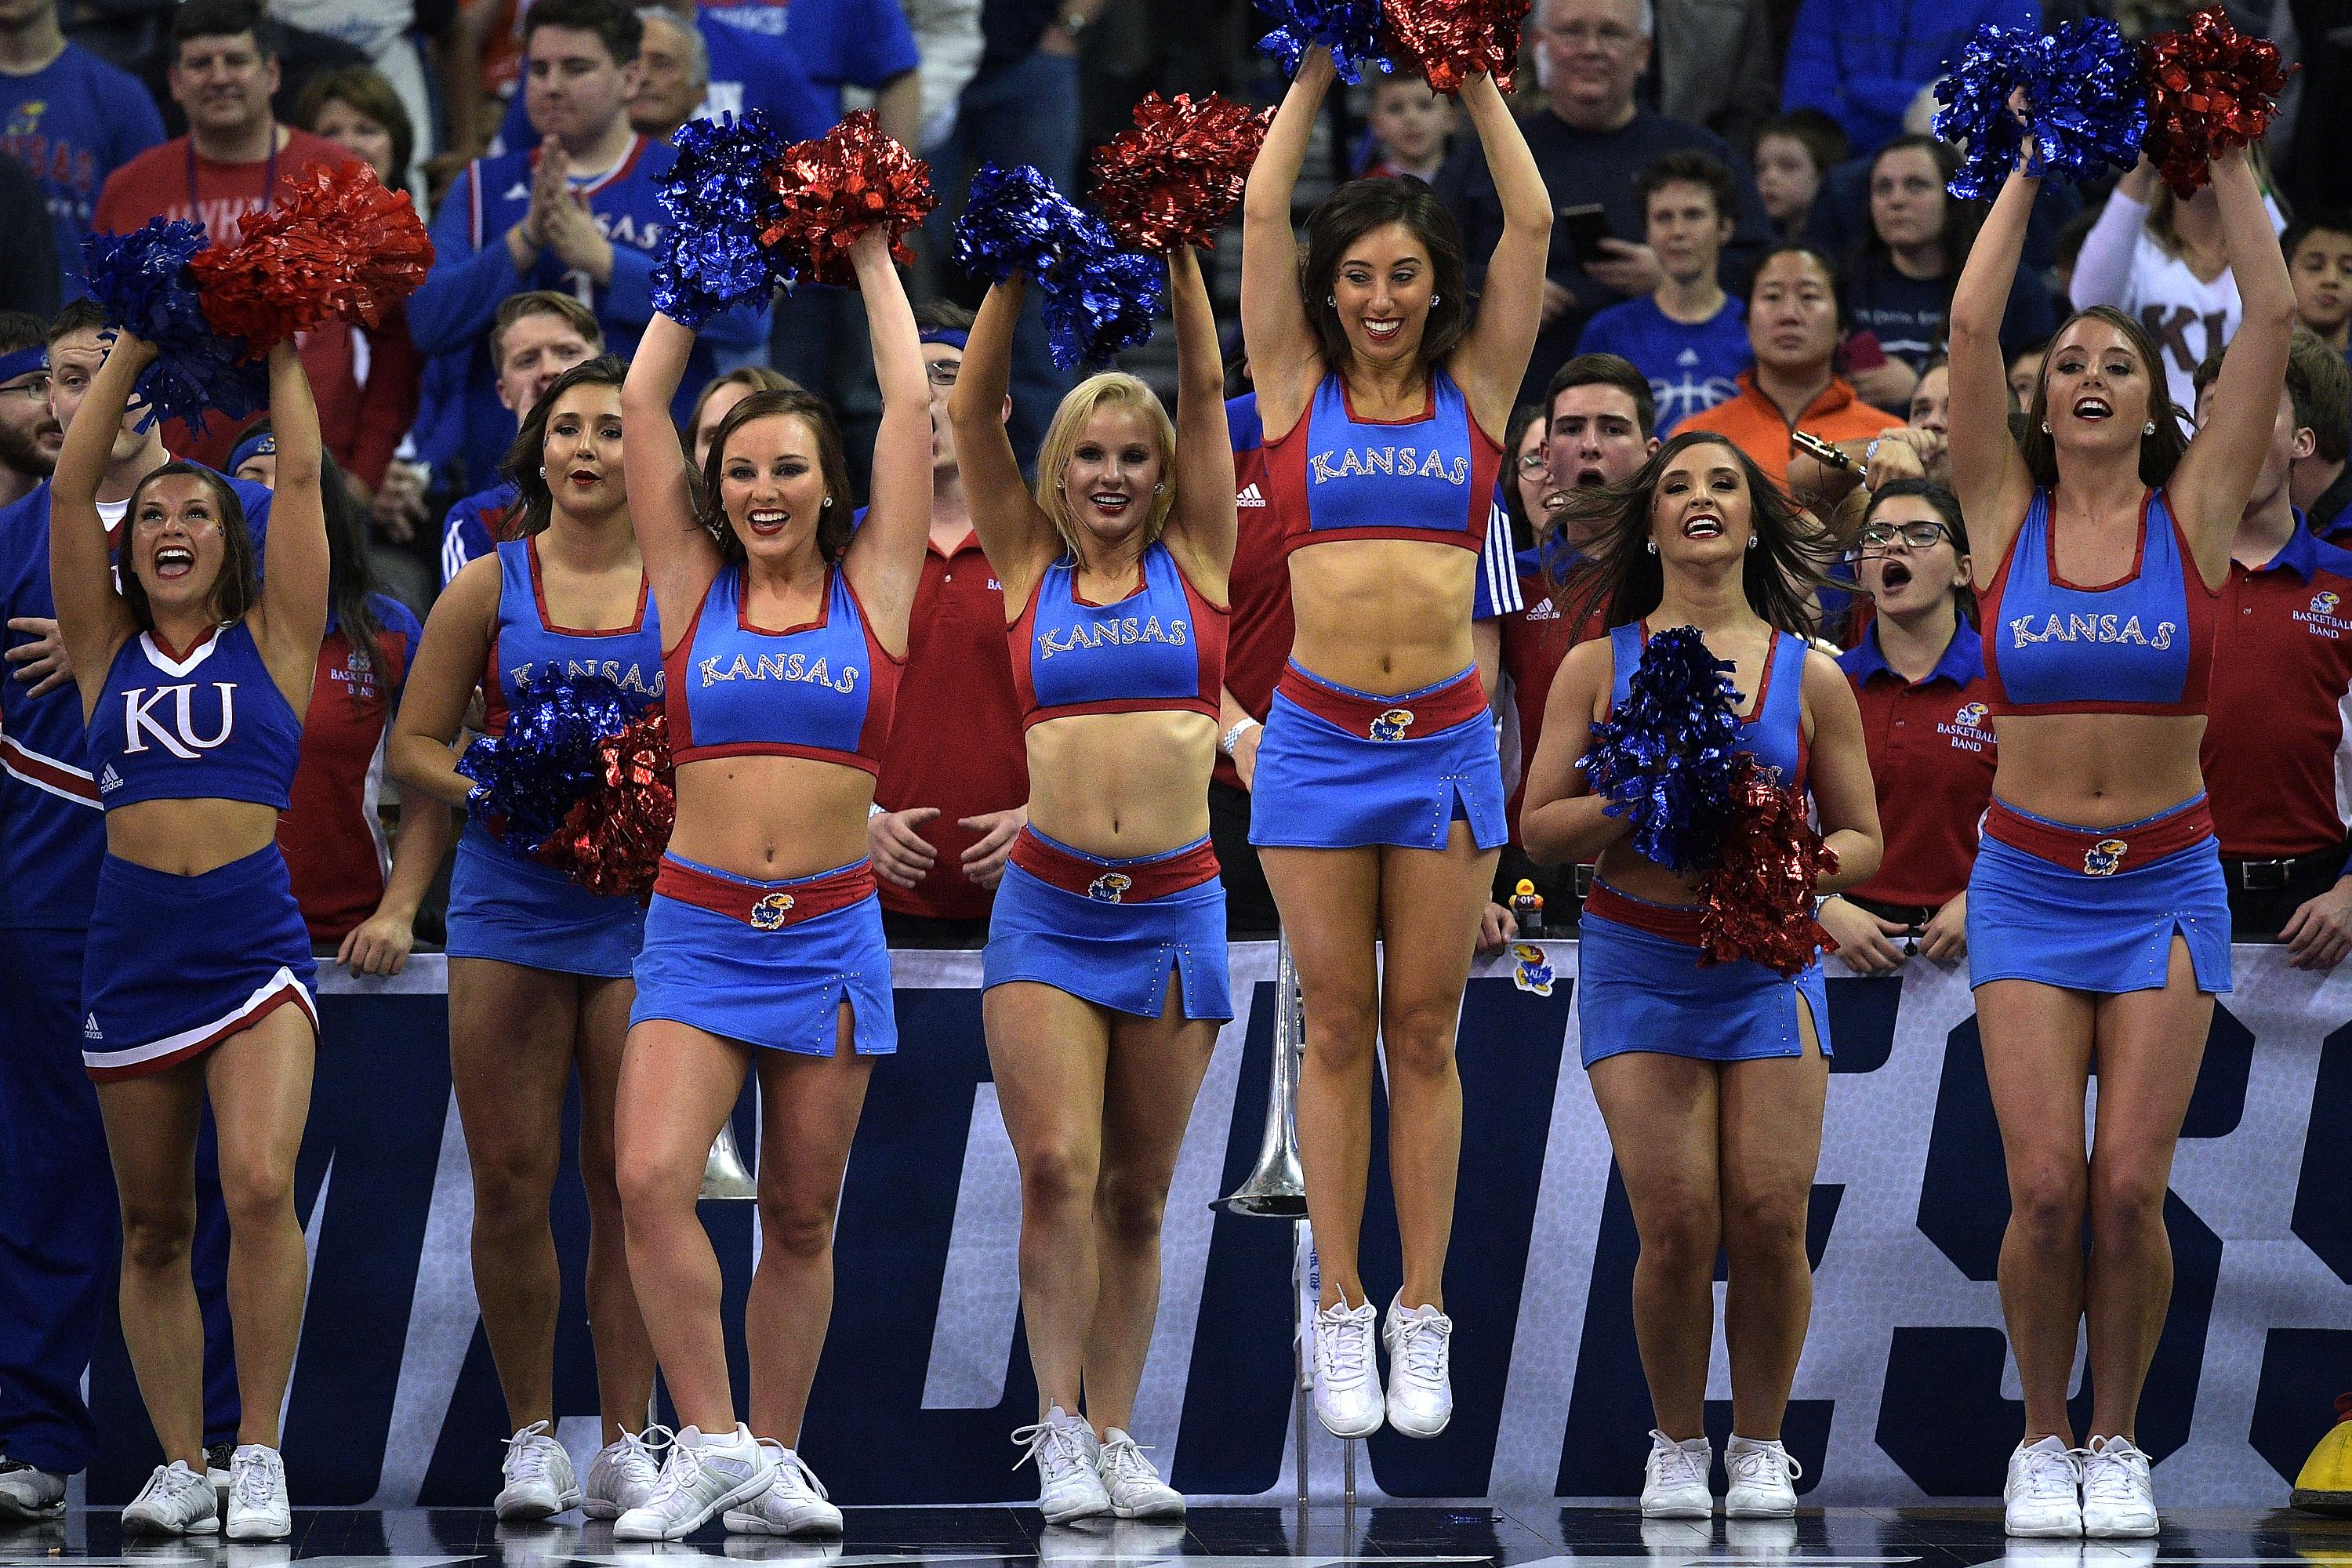 bob humphries recommends College Cheerleaders Exposed